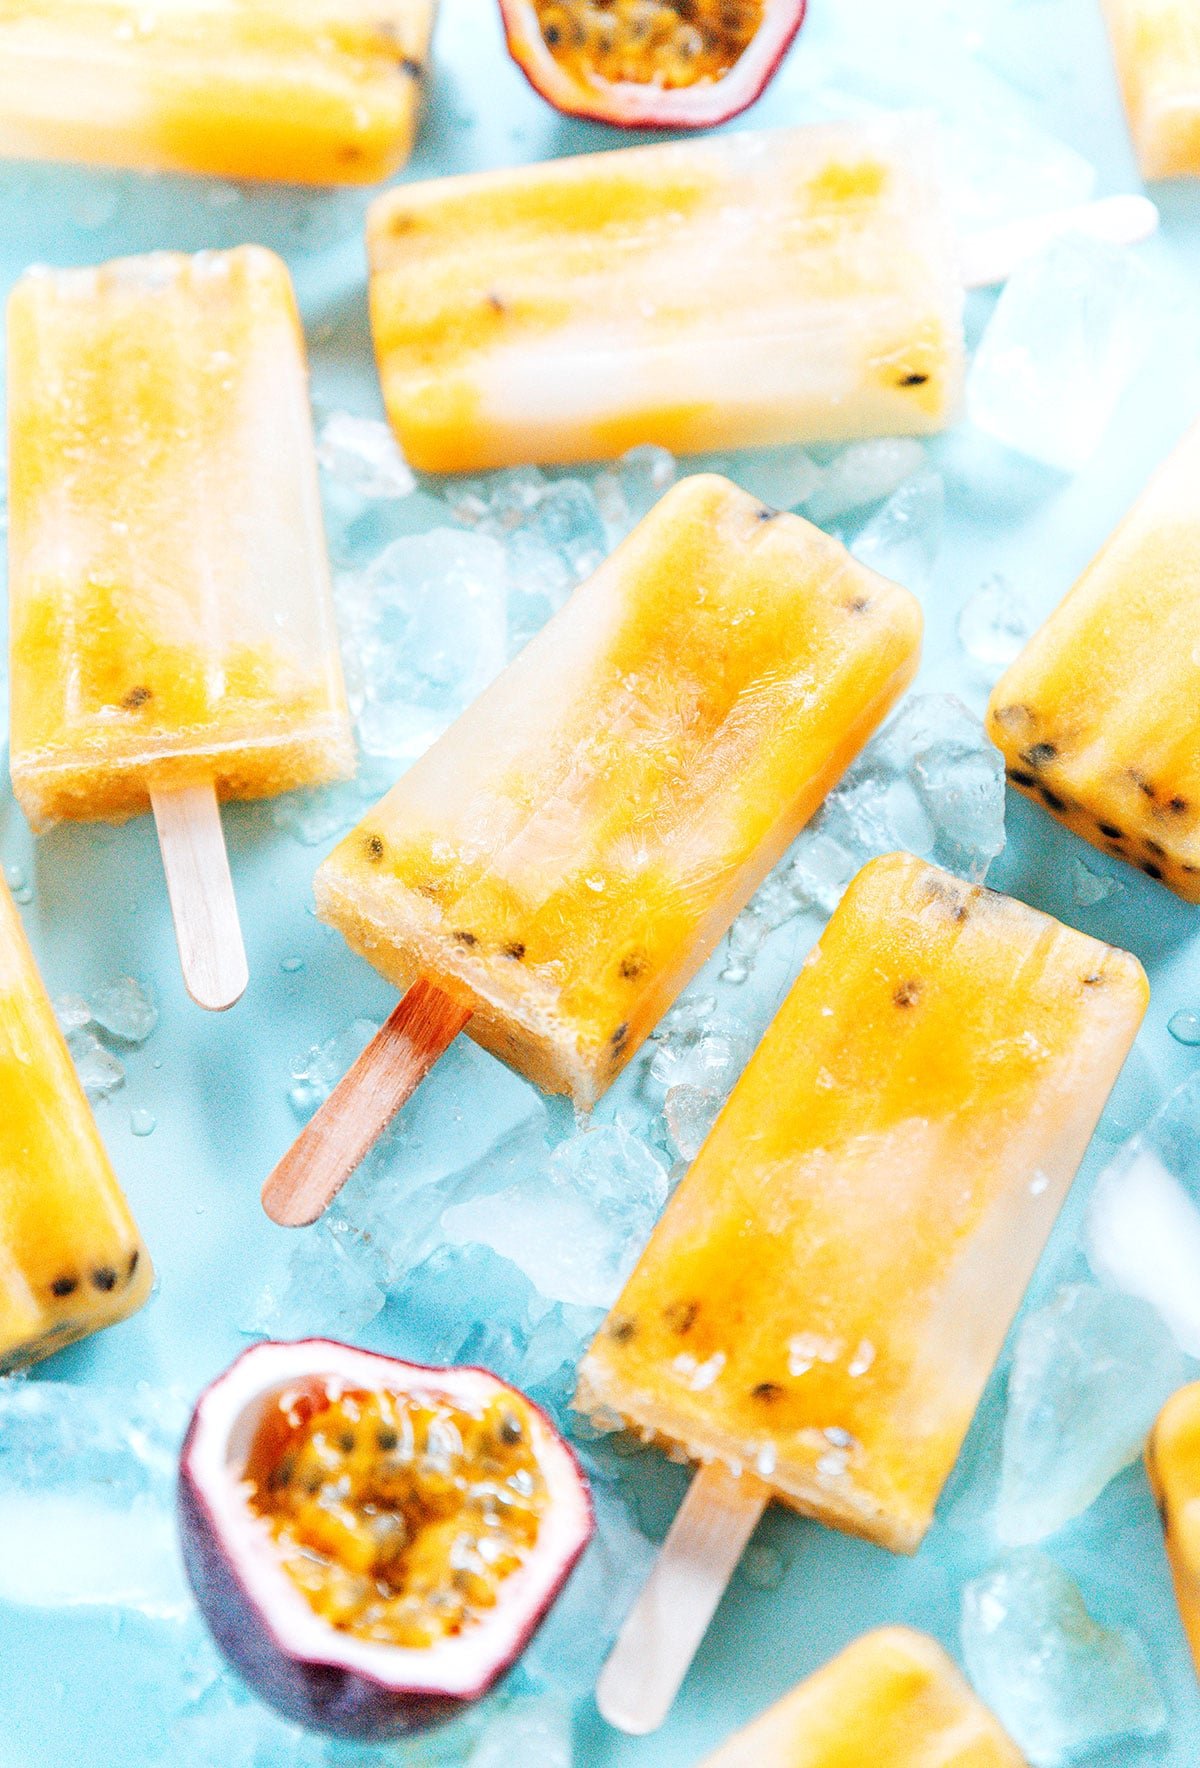 Popsicles, ice, and cut open passion fruit laid flat on a blue background.